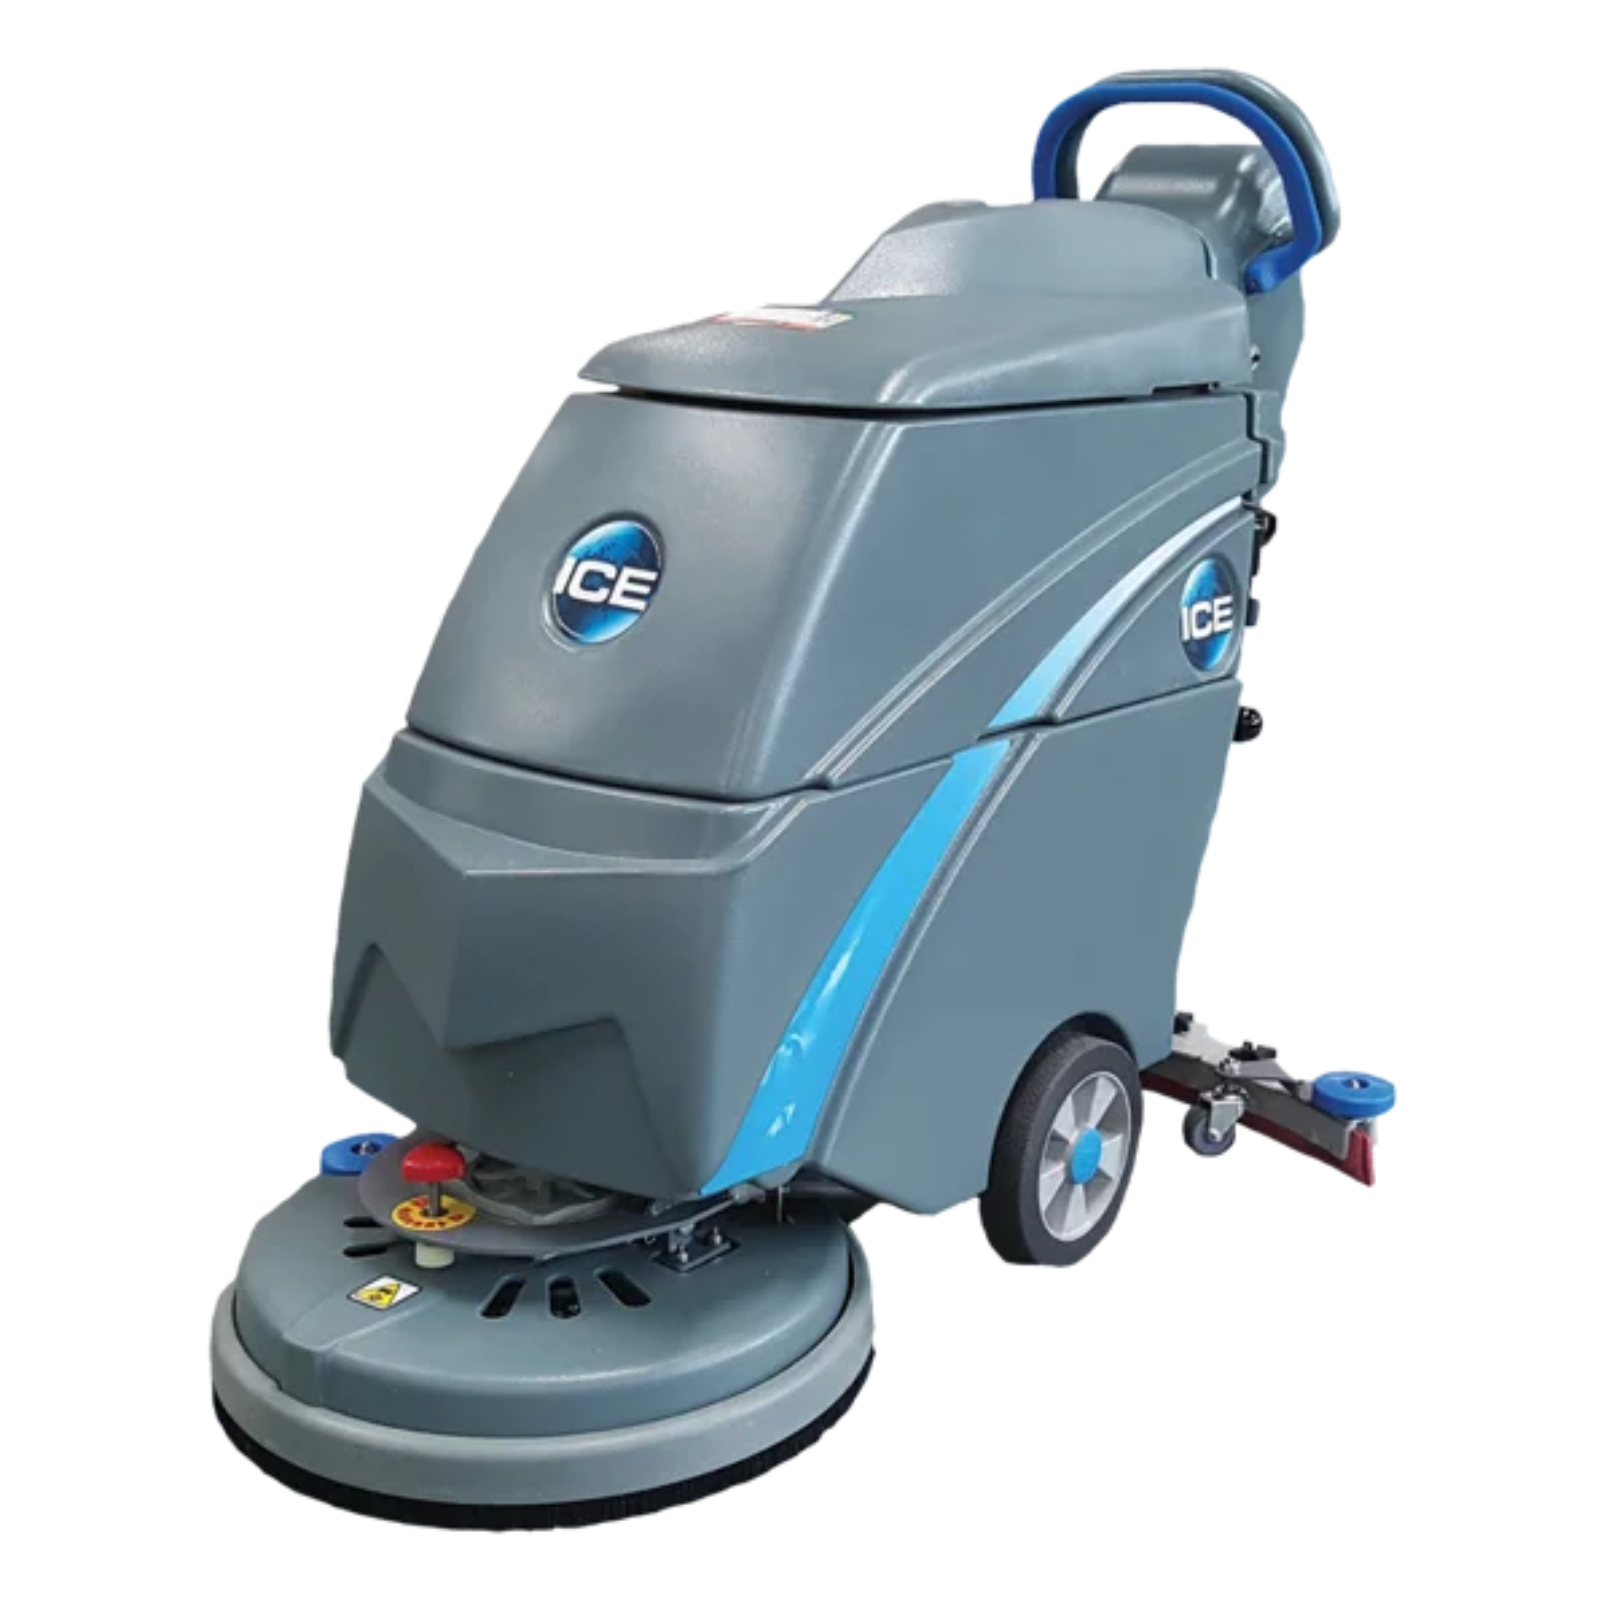 ICE 18B Scrubber Dryer c/w brush & pad holder, battery & charger